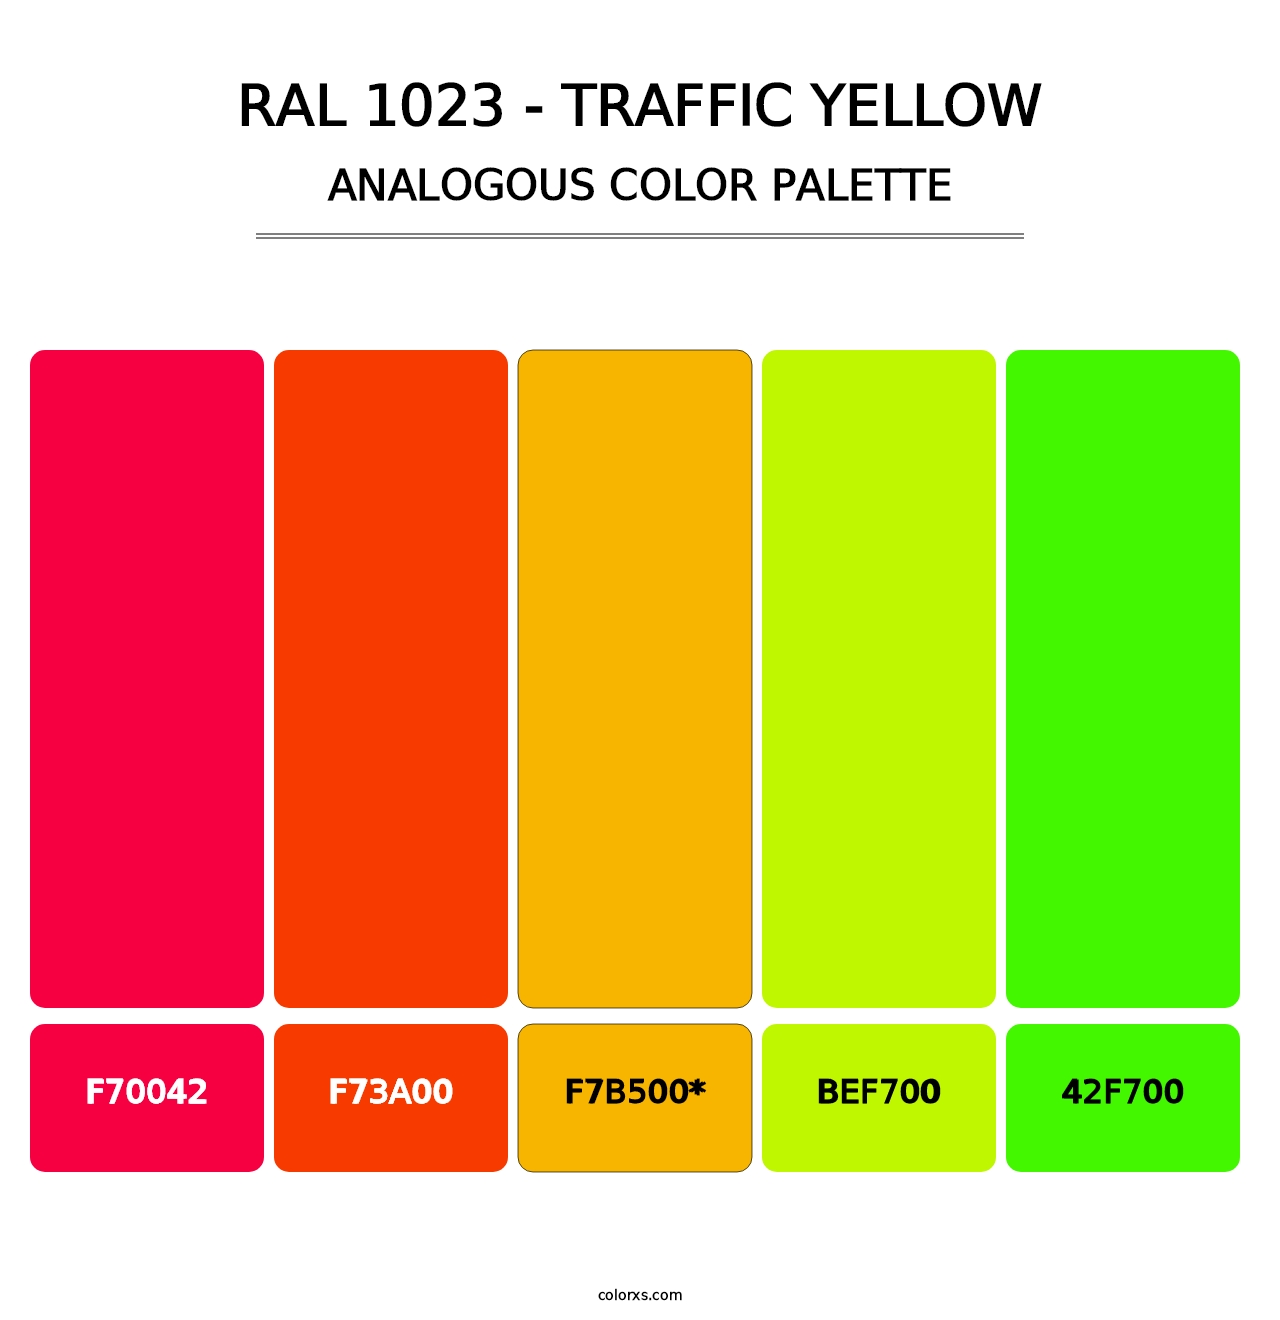 RAL 1023 - Traffic Yellow - Analogous Color Palette